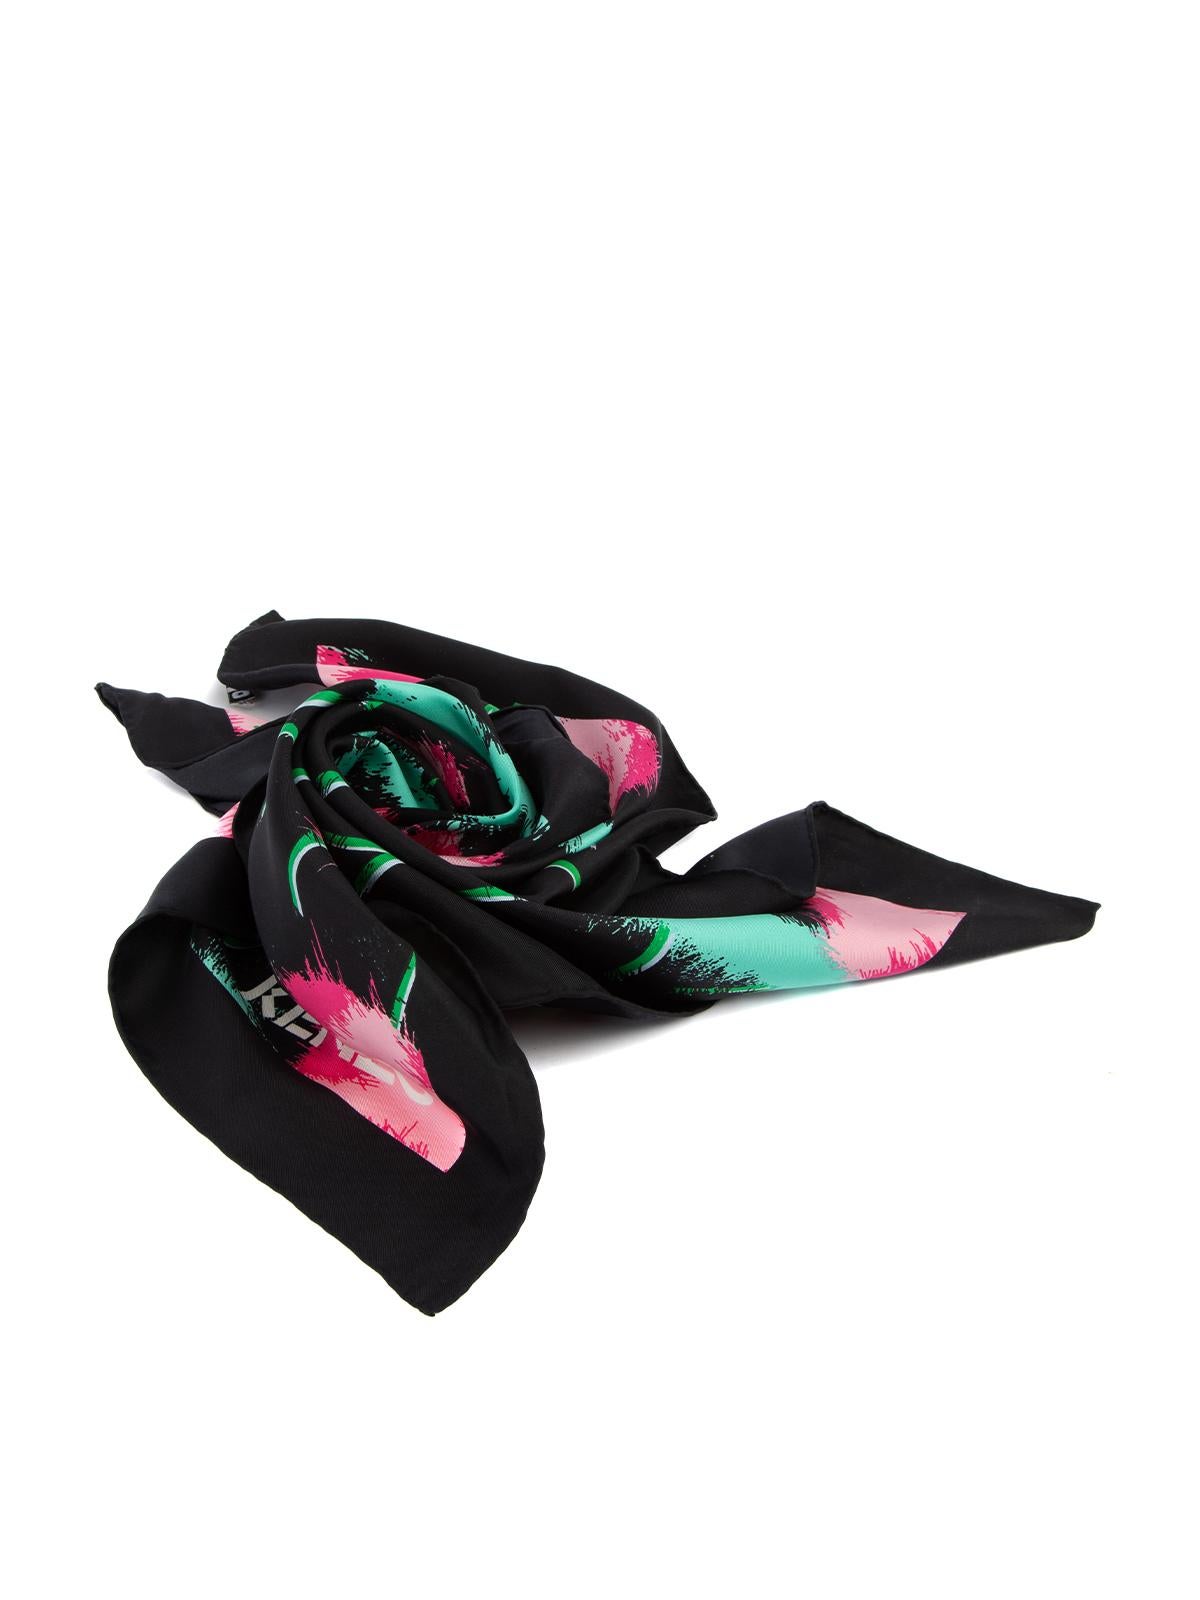 CONDITION is Very good. Minimal wear to scarf is evident, loose thread can be seen on the label of this used Kenzo designer resale item. Details Multicolour- Black, green and pink Silk Square scarf Tree patterned Kenzo logo printed on front corner